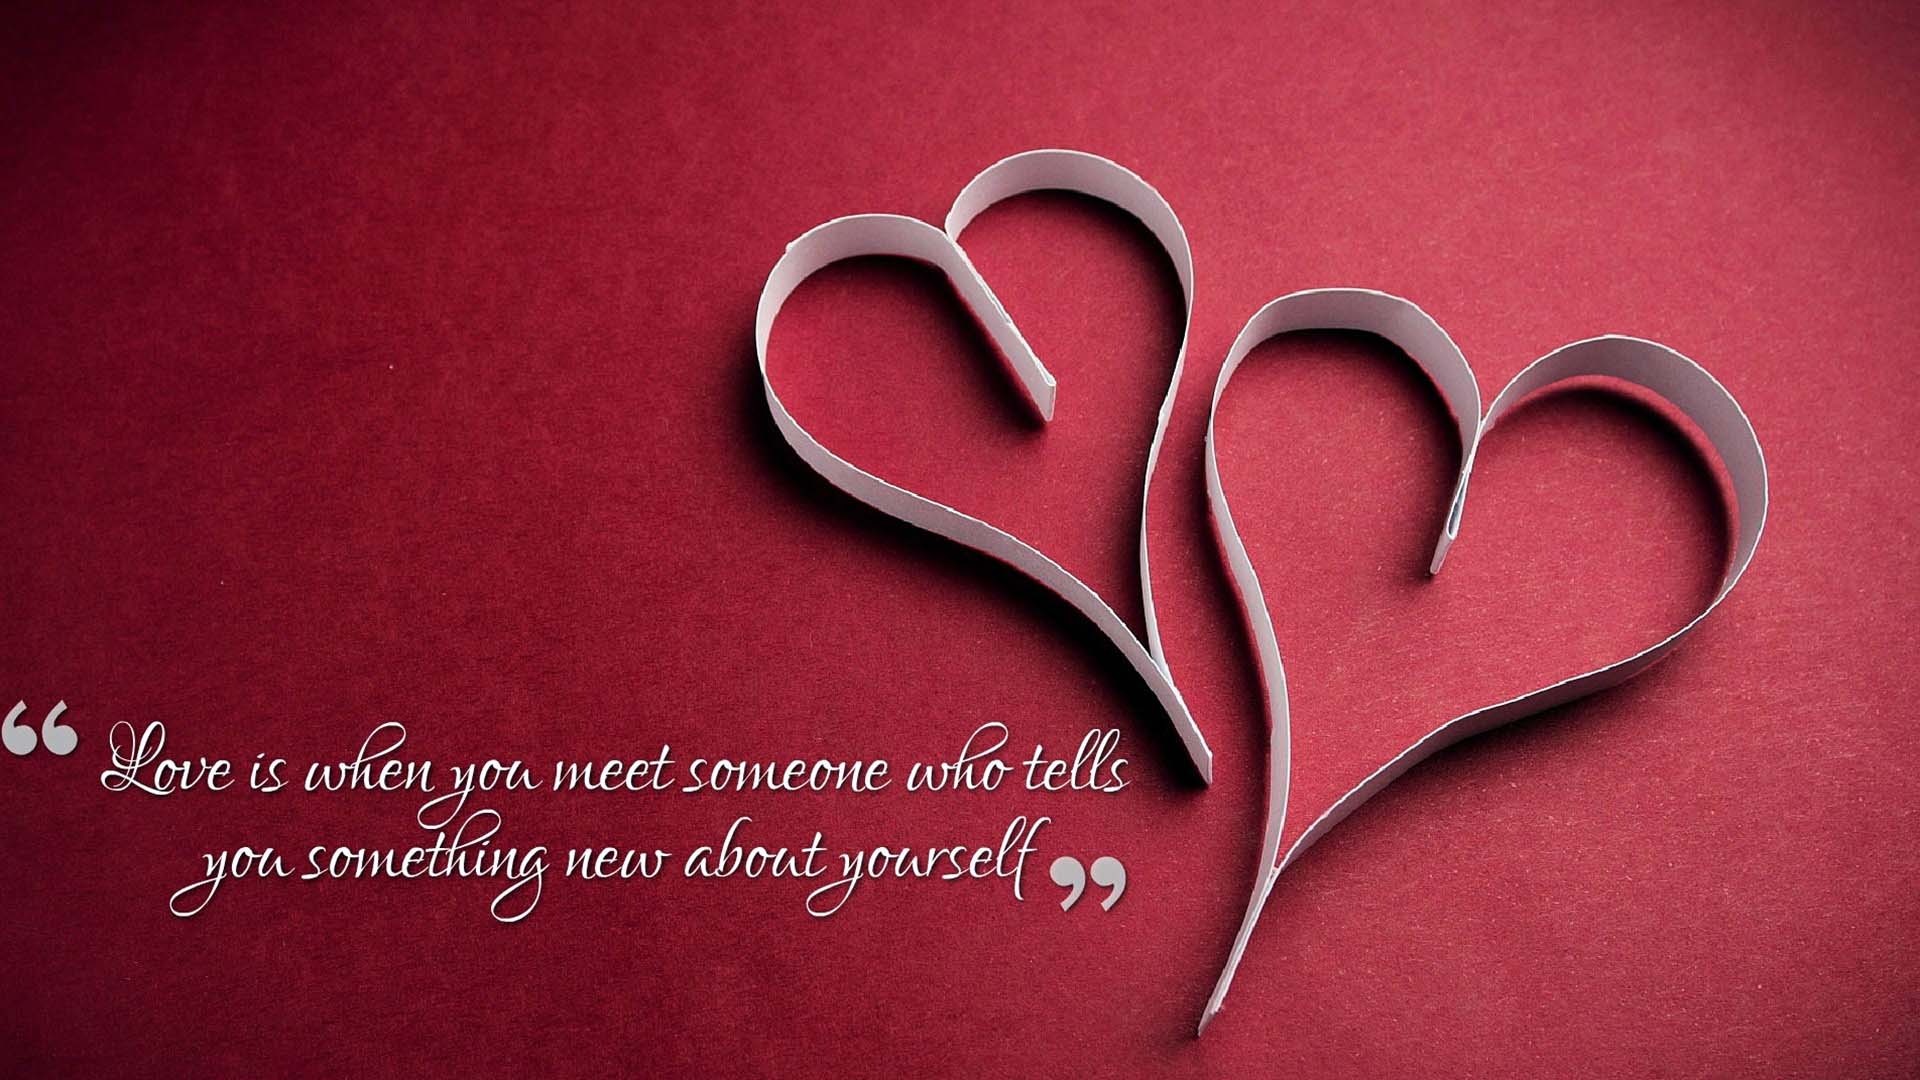 New Thoughts And Quotes On Love Image Background